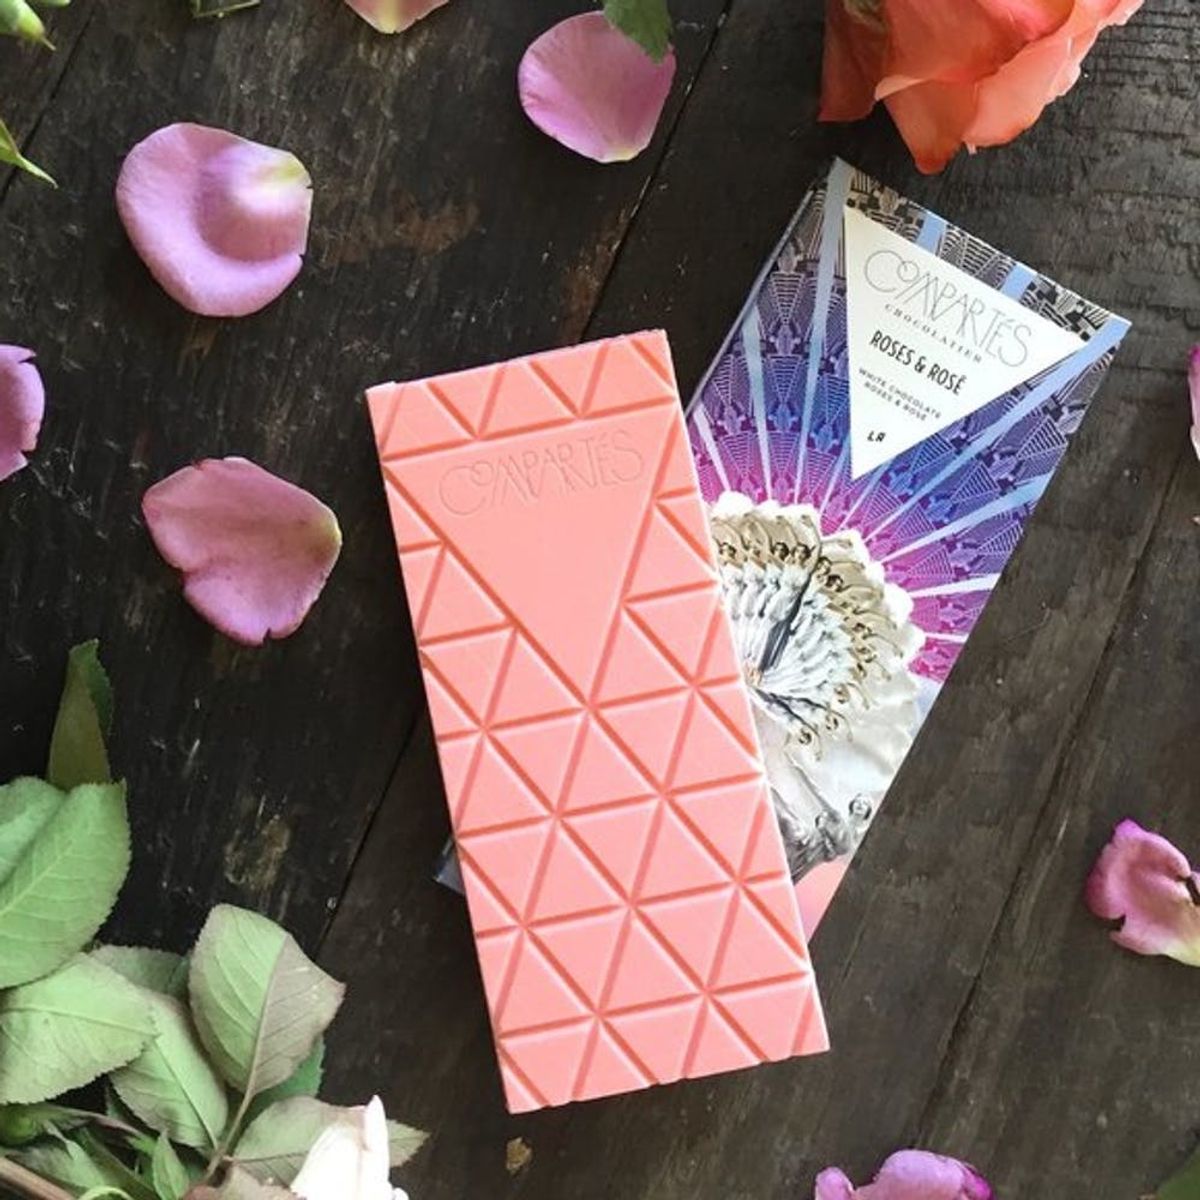 Rosé Chocolate Is the Pretty New Treat You’ll Need to Get Your Hands On